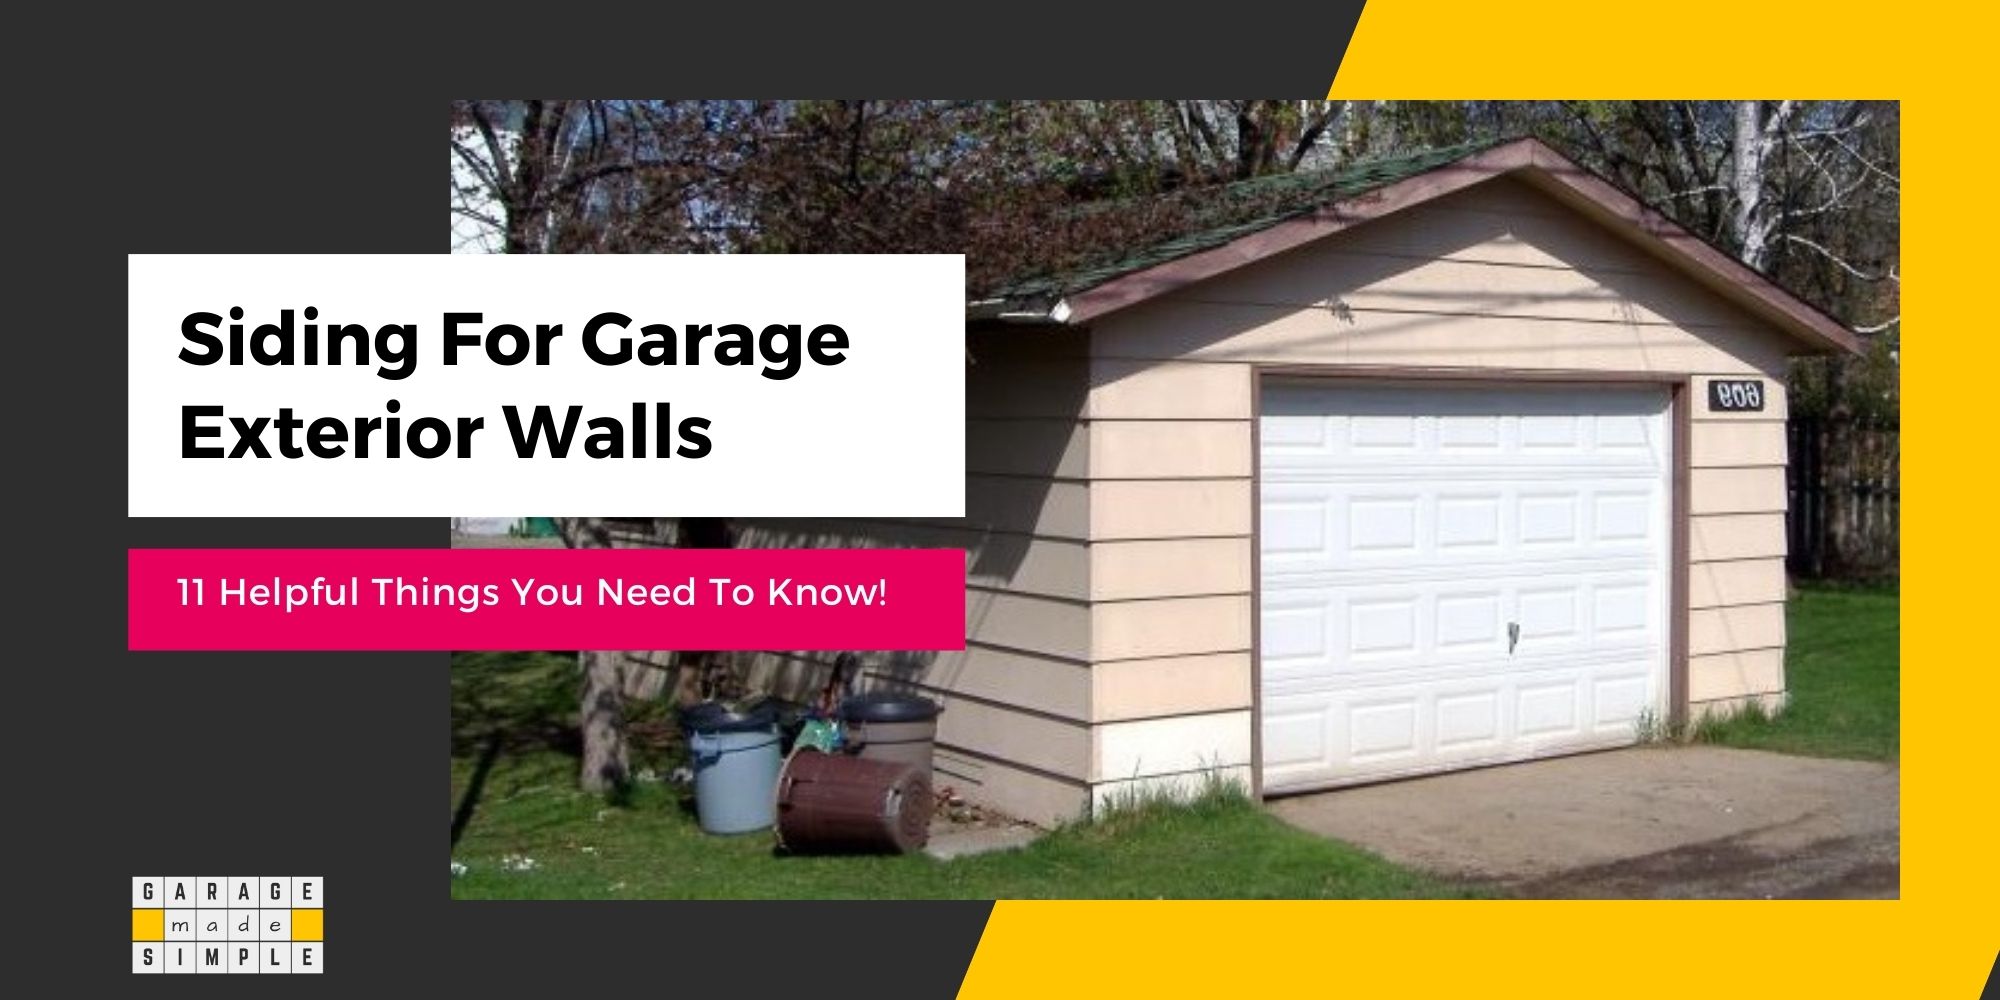 Siding For Garage Exterior Walls (11 Helpful Things You Need To Know)